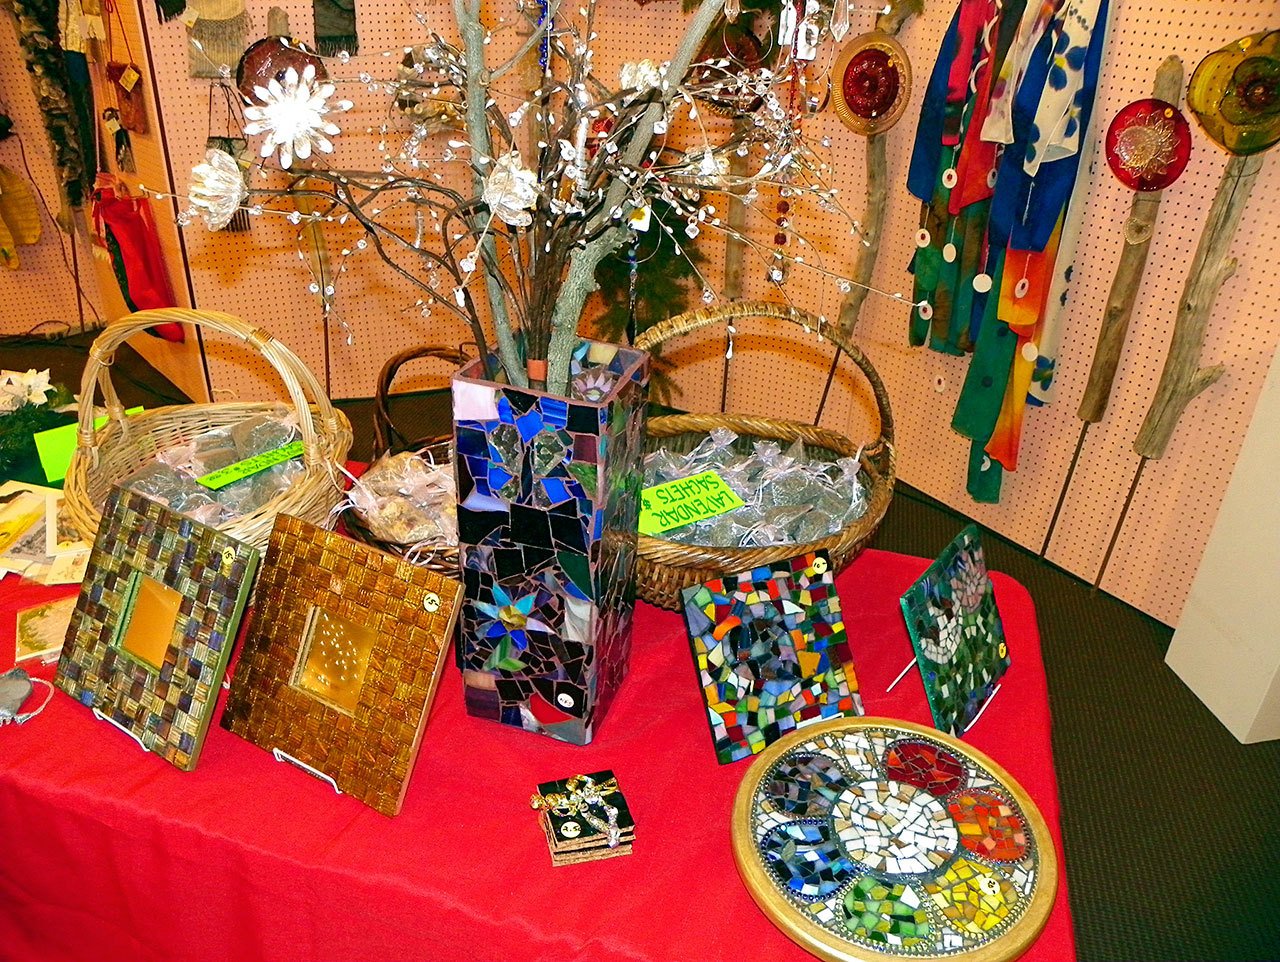 Unity Church of Port Townsend today and Saturday will host its seventh annual Festival of Lights at Unity Spiritual Enrichment Center, 3918 San Juan Ave. Holiday gifts will be on sale during a holiday bazaar. (Unity Church of Port Townsend)